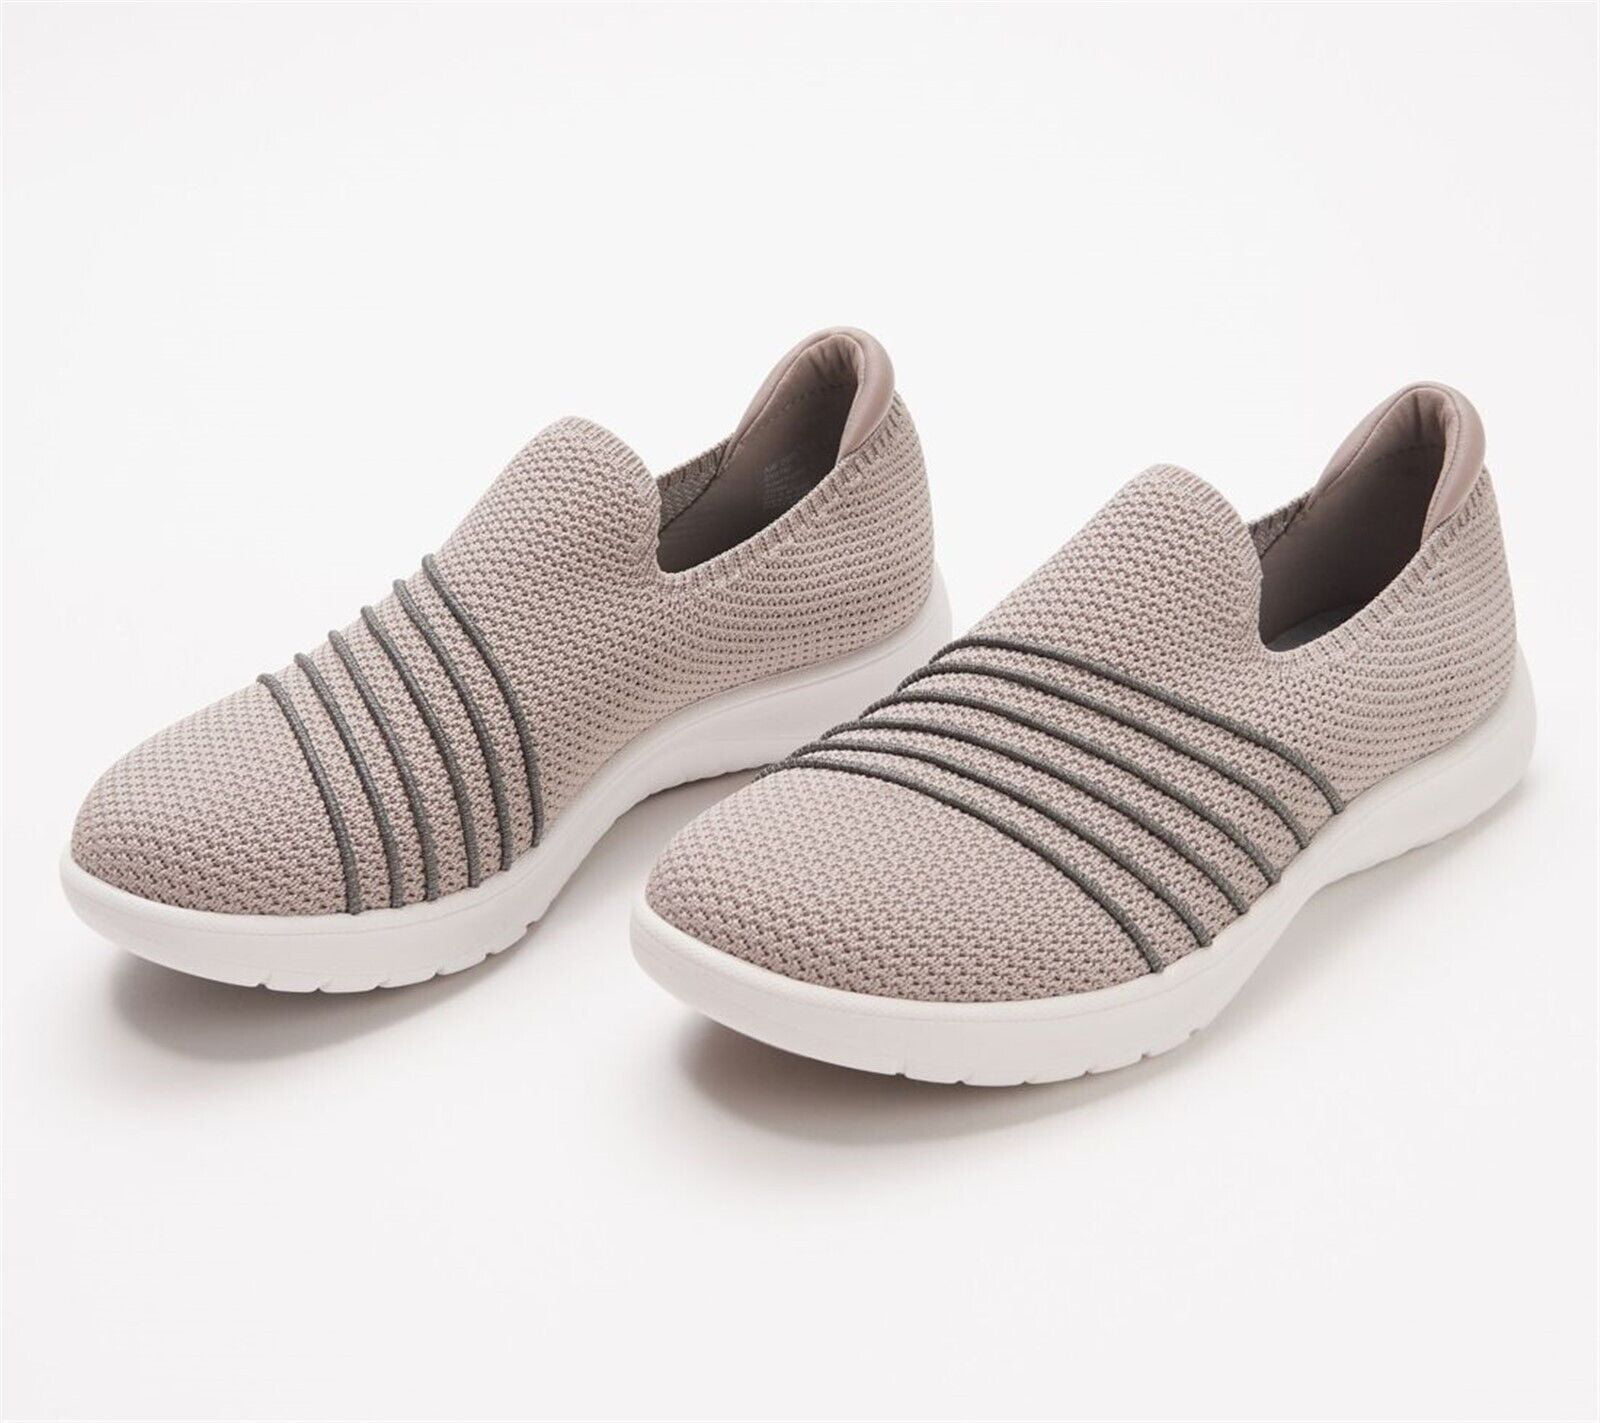 Clarks Cloudsteppers Washable Knit Adella Step Women's A452531 - Walmart.com